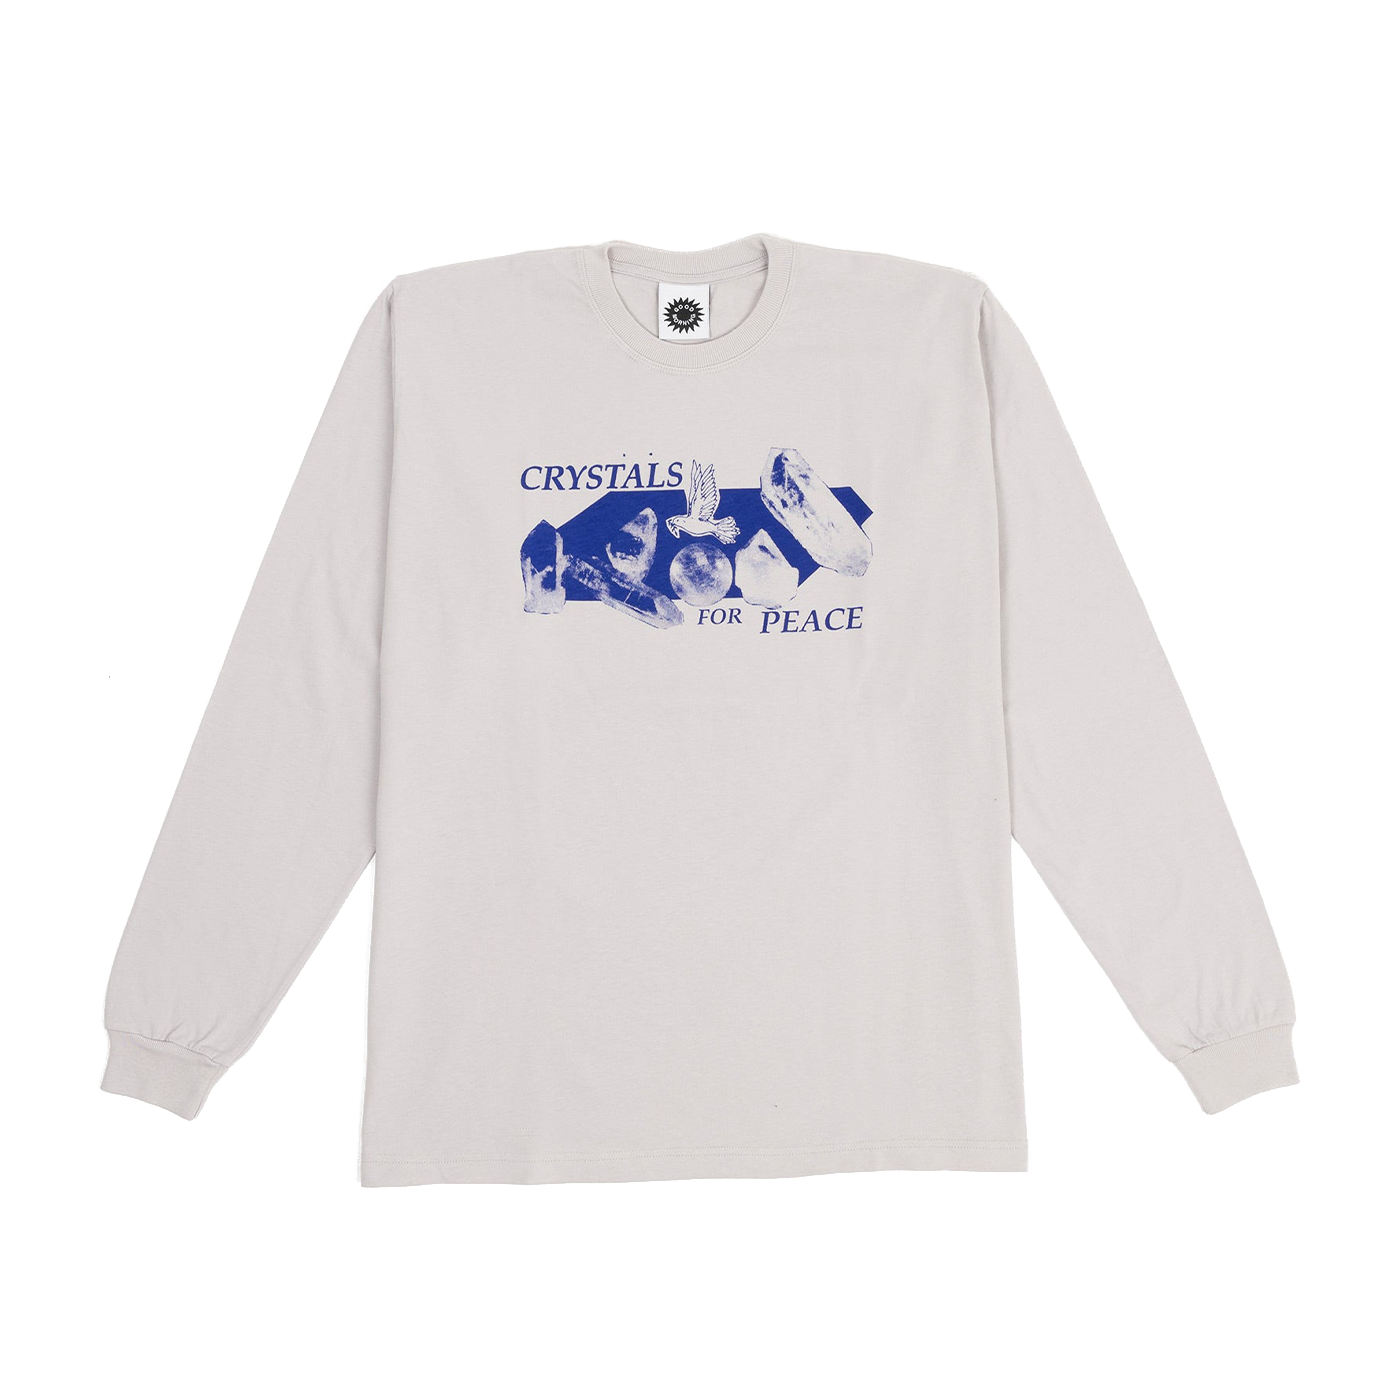 Cruystals For Peace Longsleeve T-Shirt